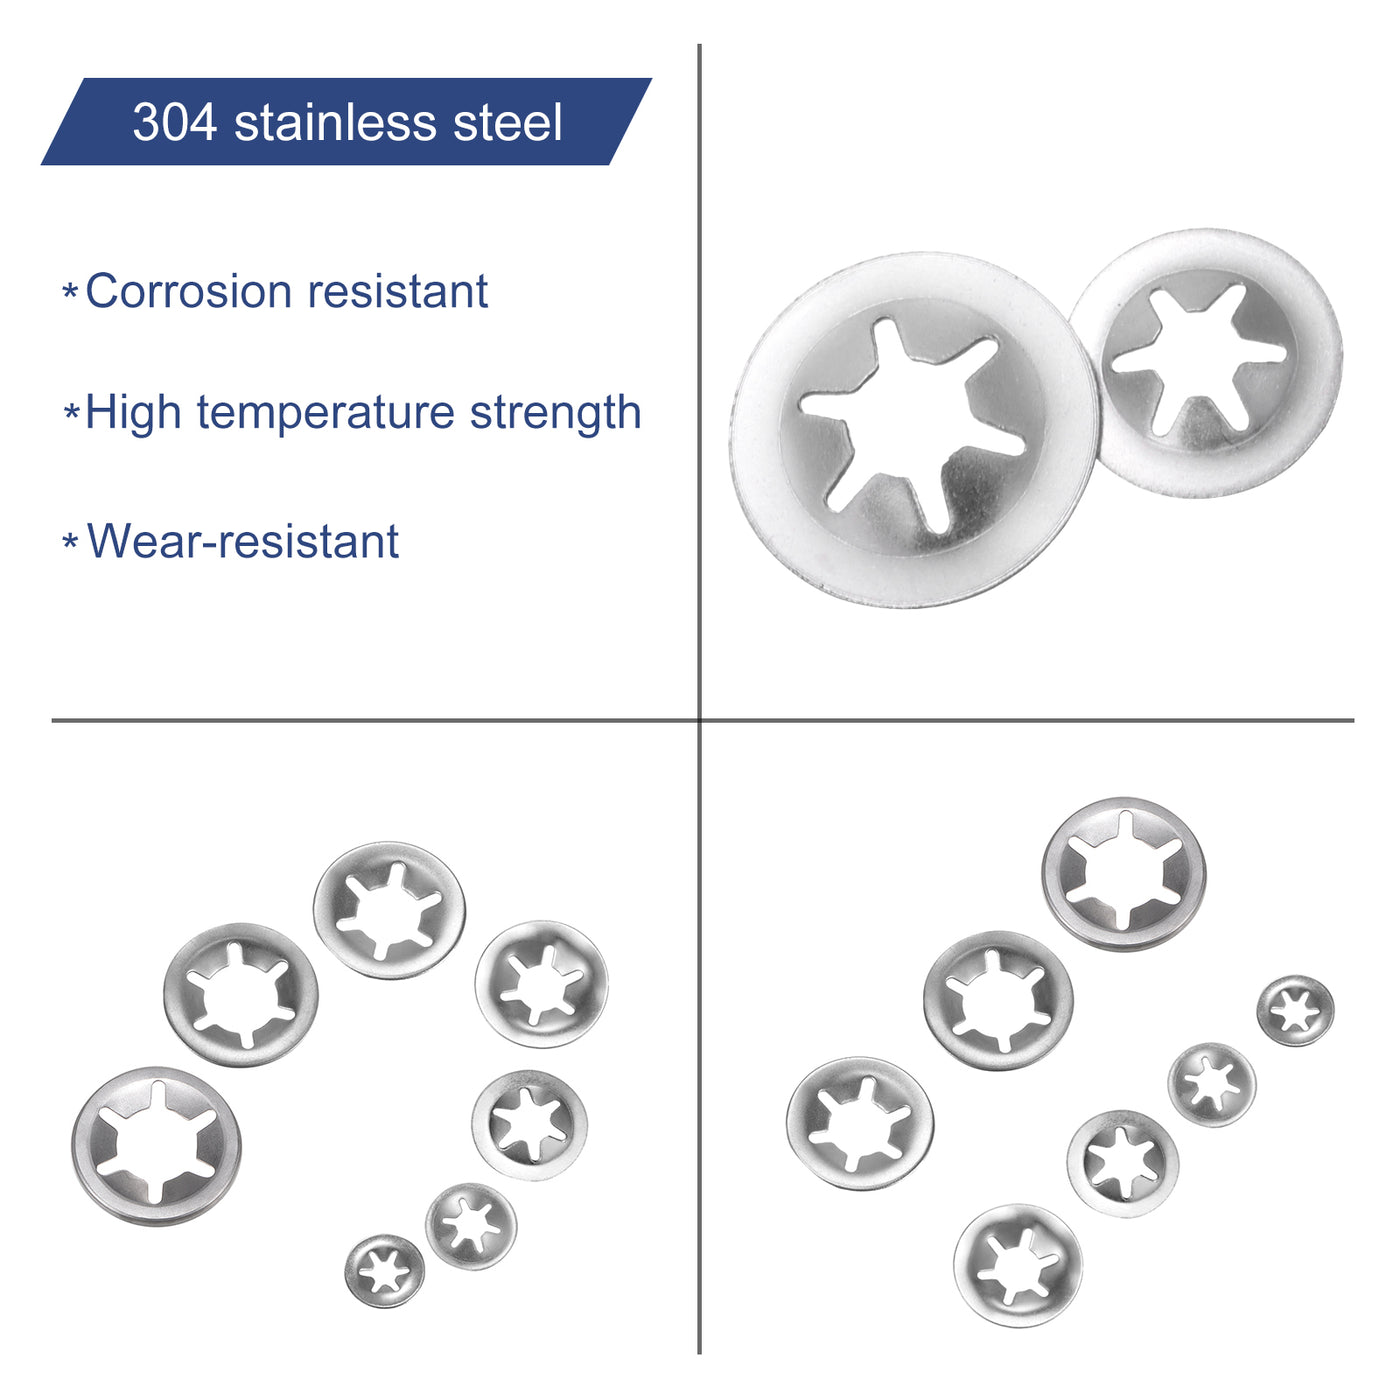 uxcell Uxcell 300pcs Internal Tooth Star Lock Washers M3 M4 M5 M6 M8 M10 M12, Stainless Steel